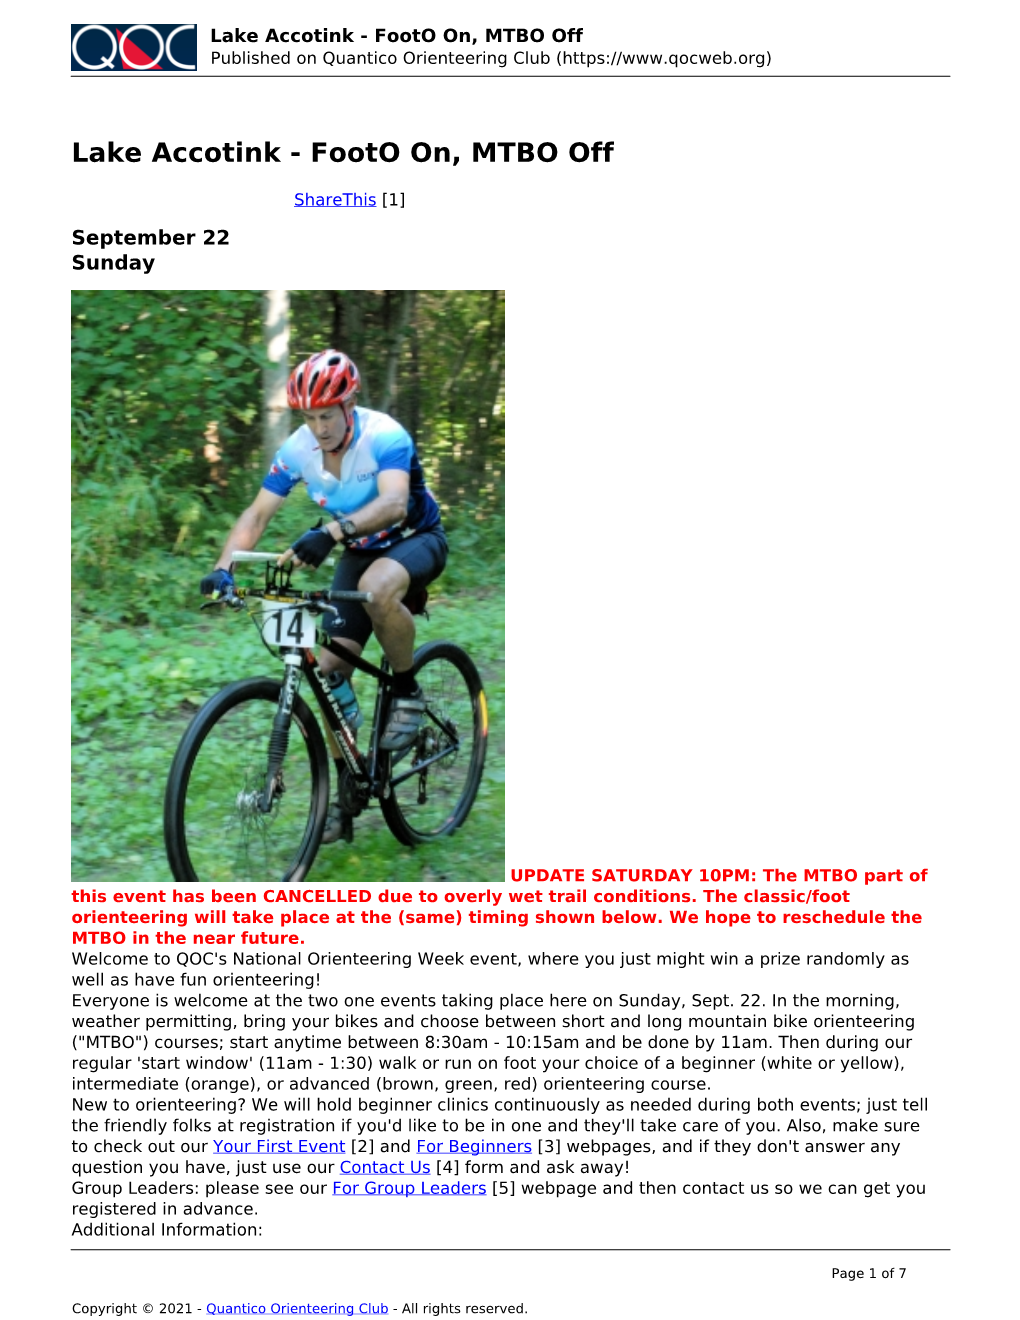 Lake Accotink - Footo On, MTBO Off Published on Quantico Orienteering Club (